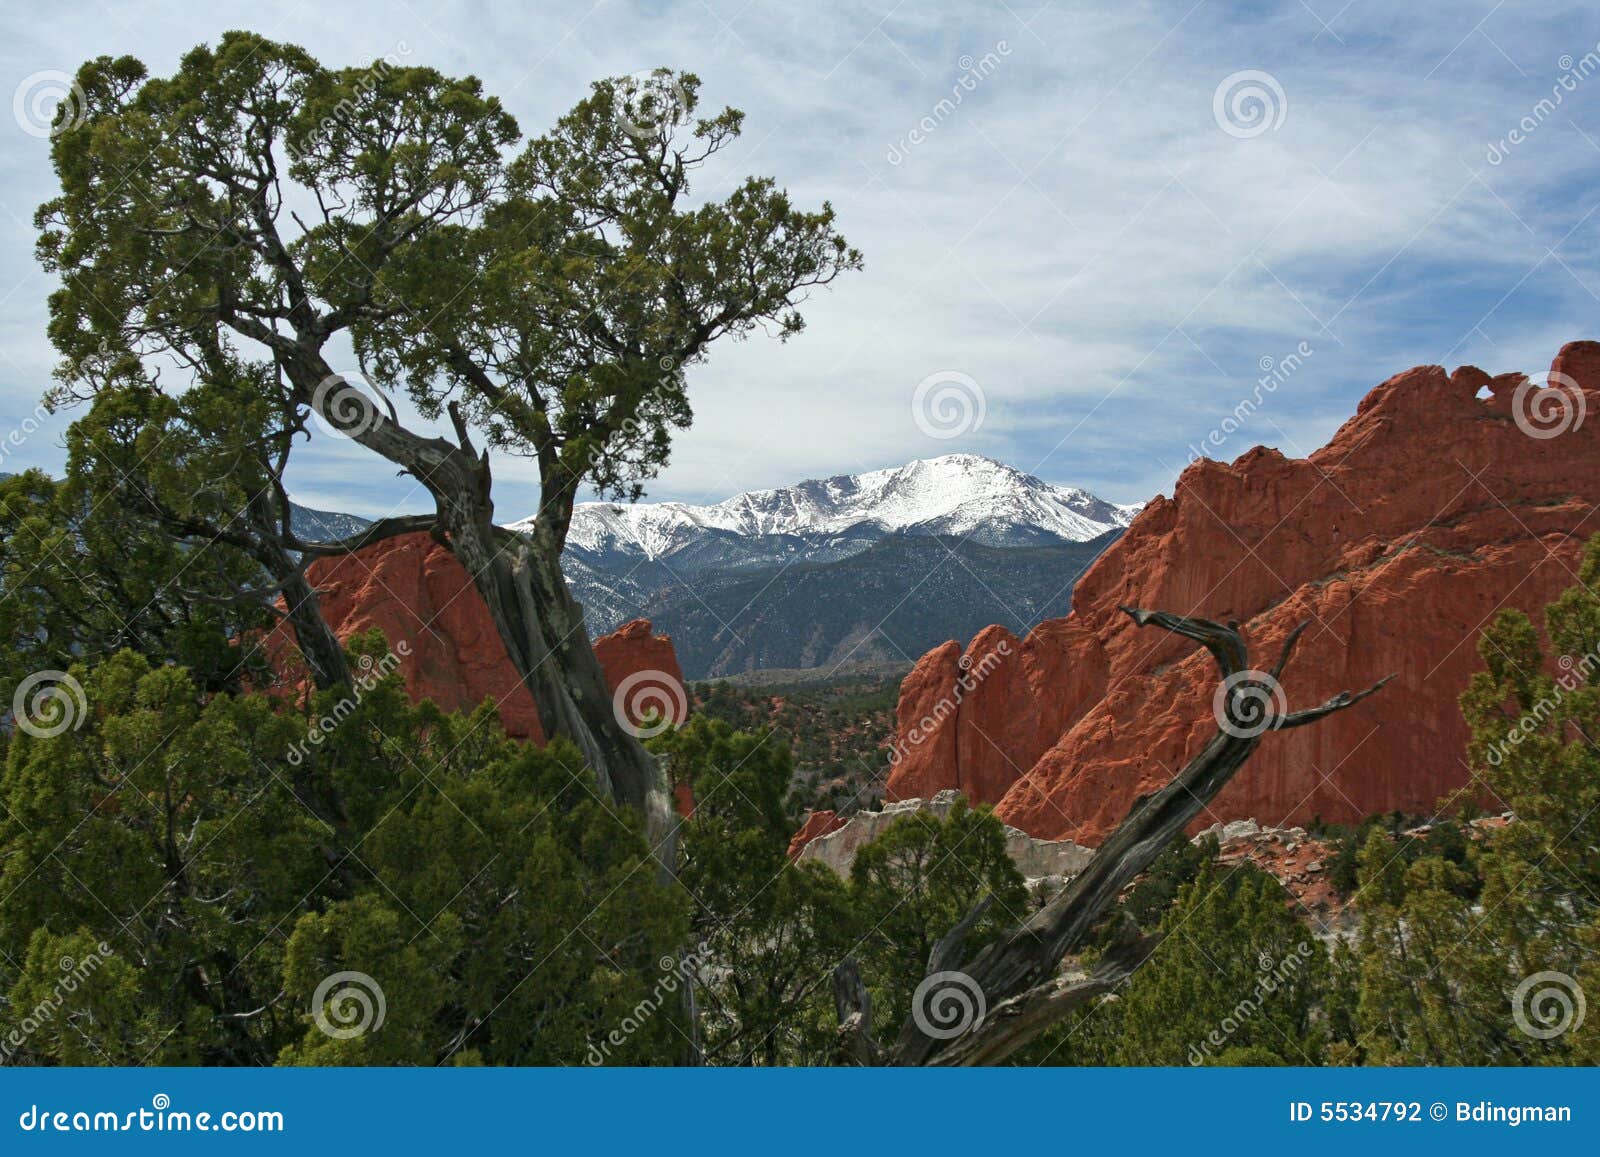 pikes peak from the garden of the gods